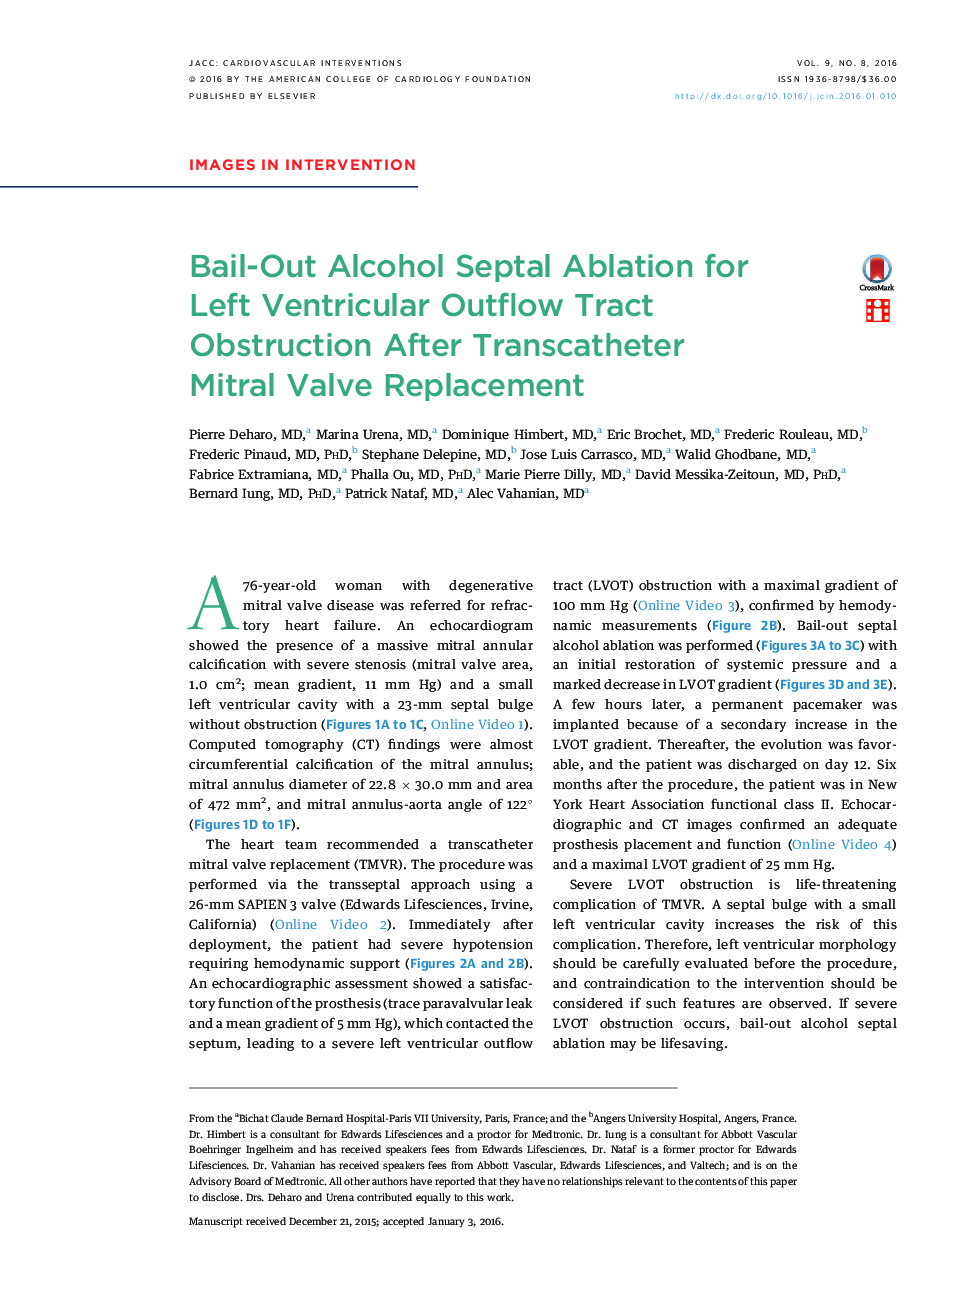 Bail-Out Alcohol Septal Ablation for LeftÂ Ventricular Outflow Tract ObstructionÂ After Transcatheter MitralÂ Valve Replacement